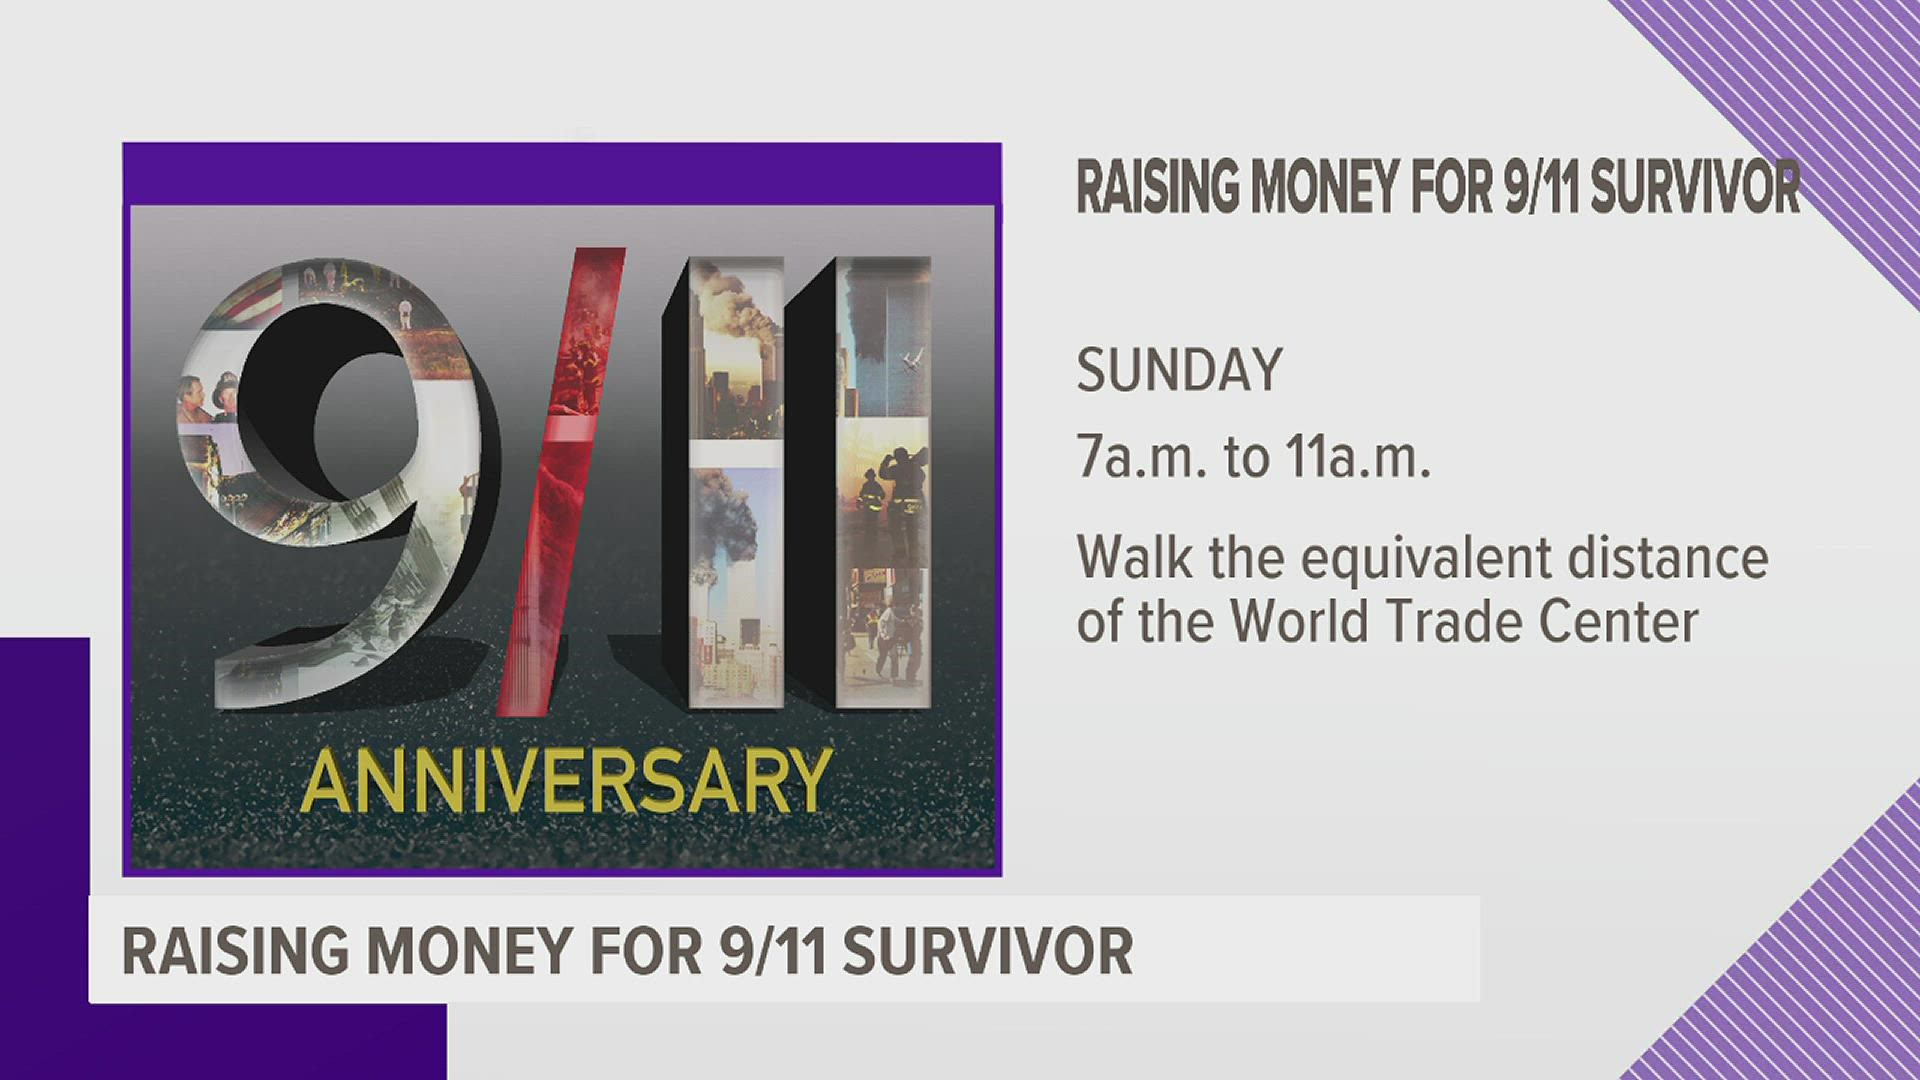 The fire service educational group is hosting a walk at Eldridge's Lancer Stadium, honoring the work of 9/11 firefighters and collecting donations for a survivor.